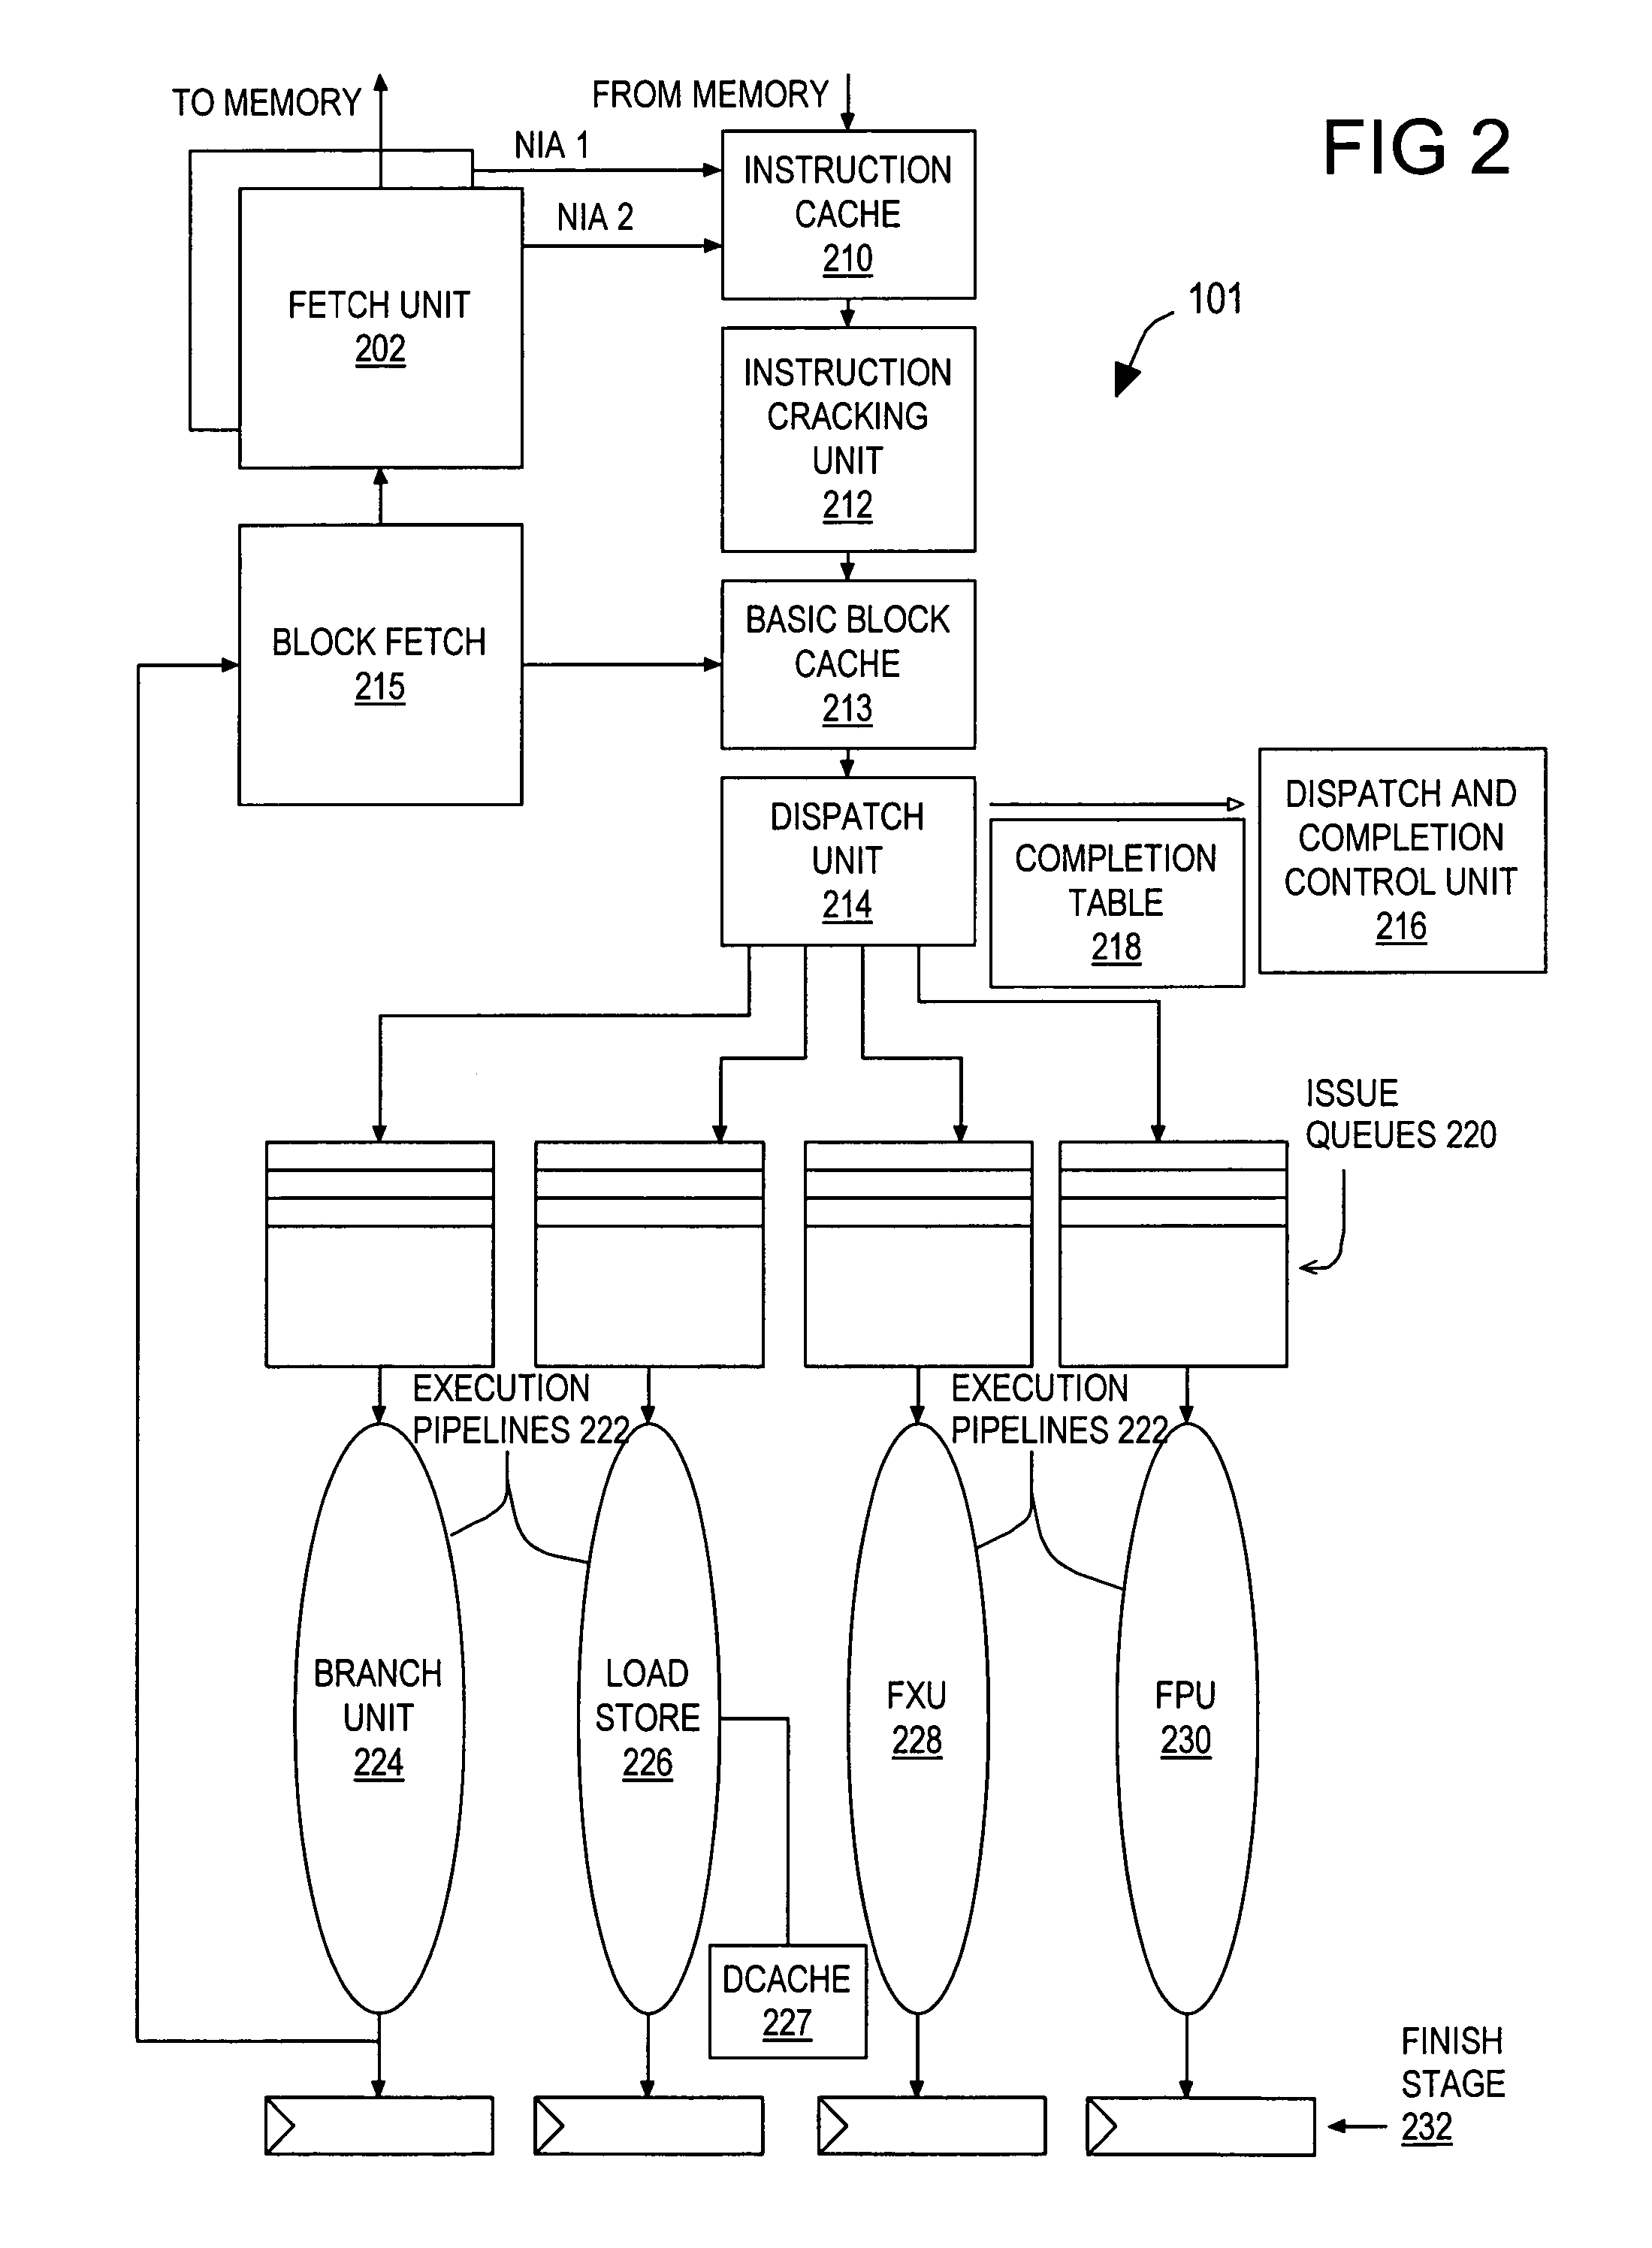 Performance throttling for temperature reduction in a microprocessor